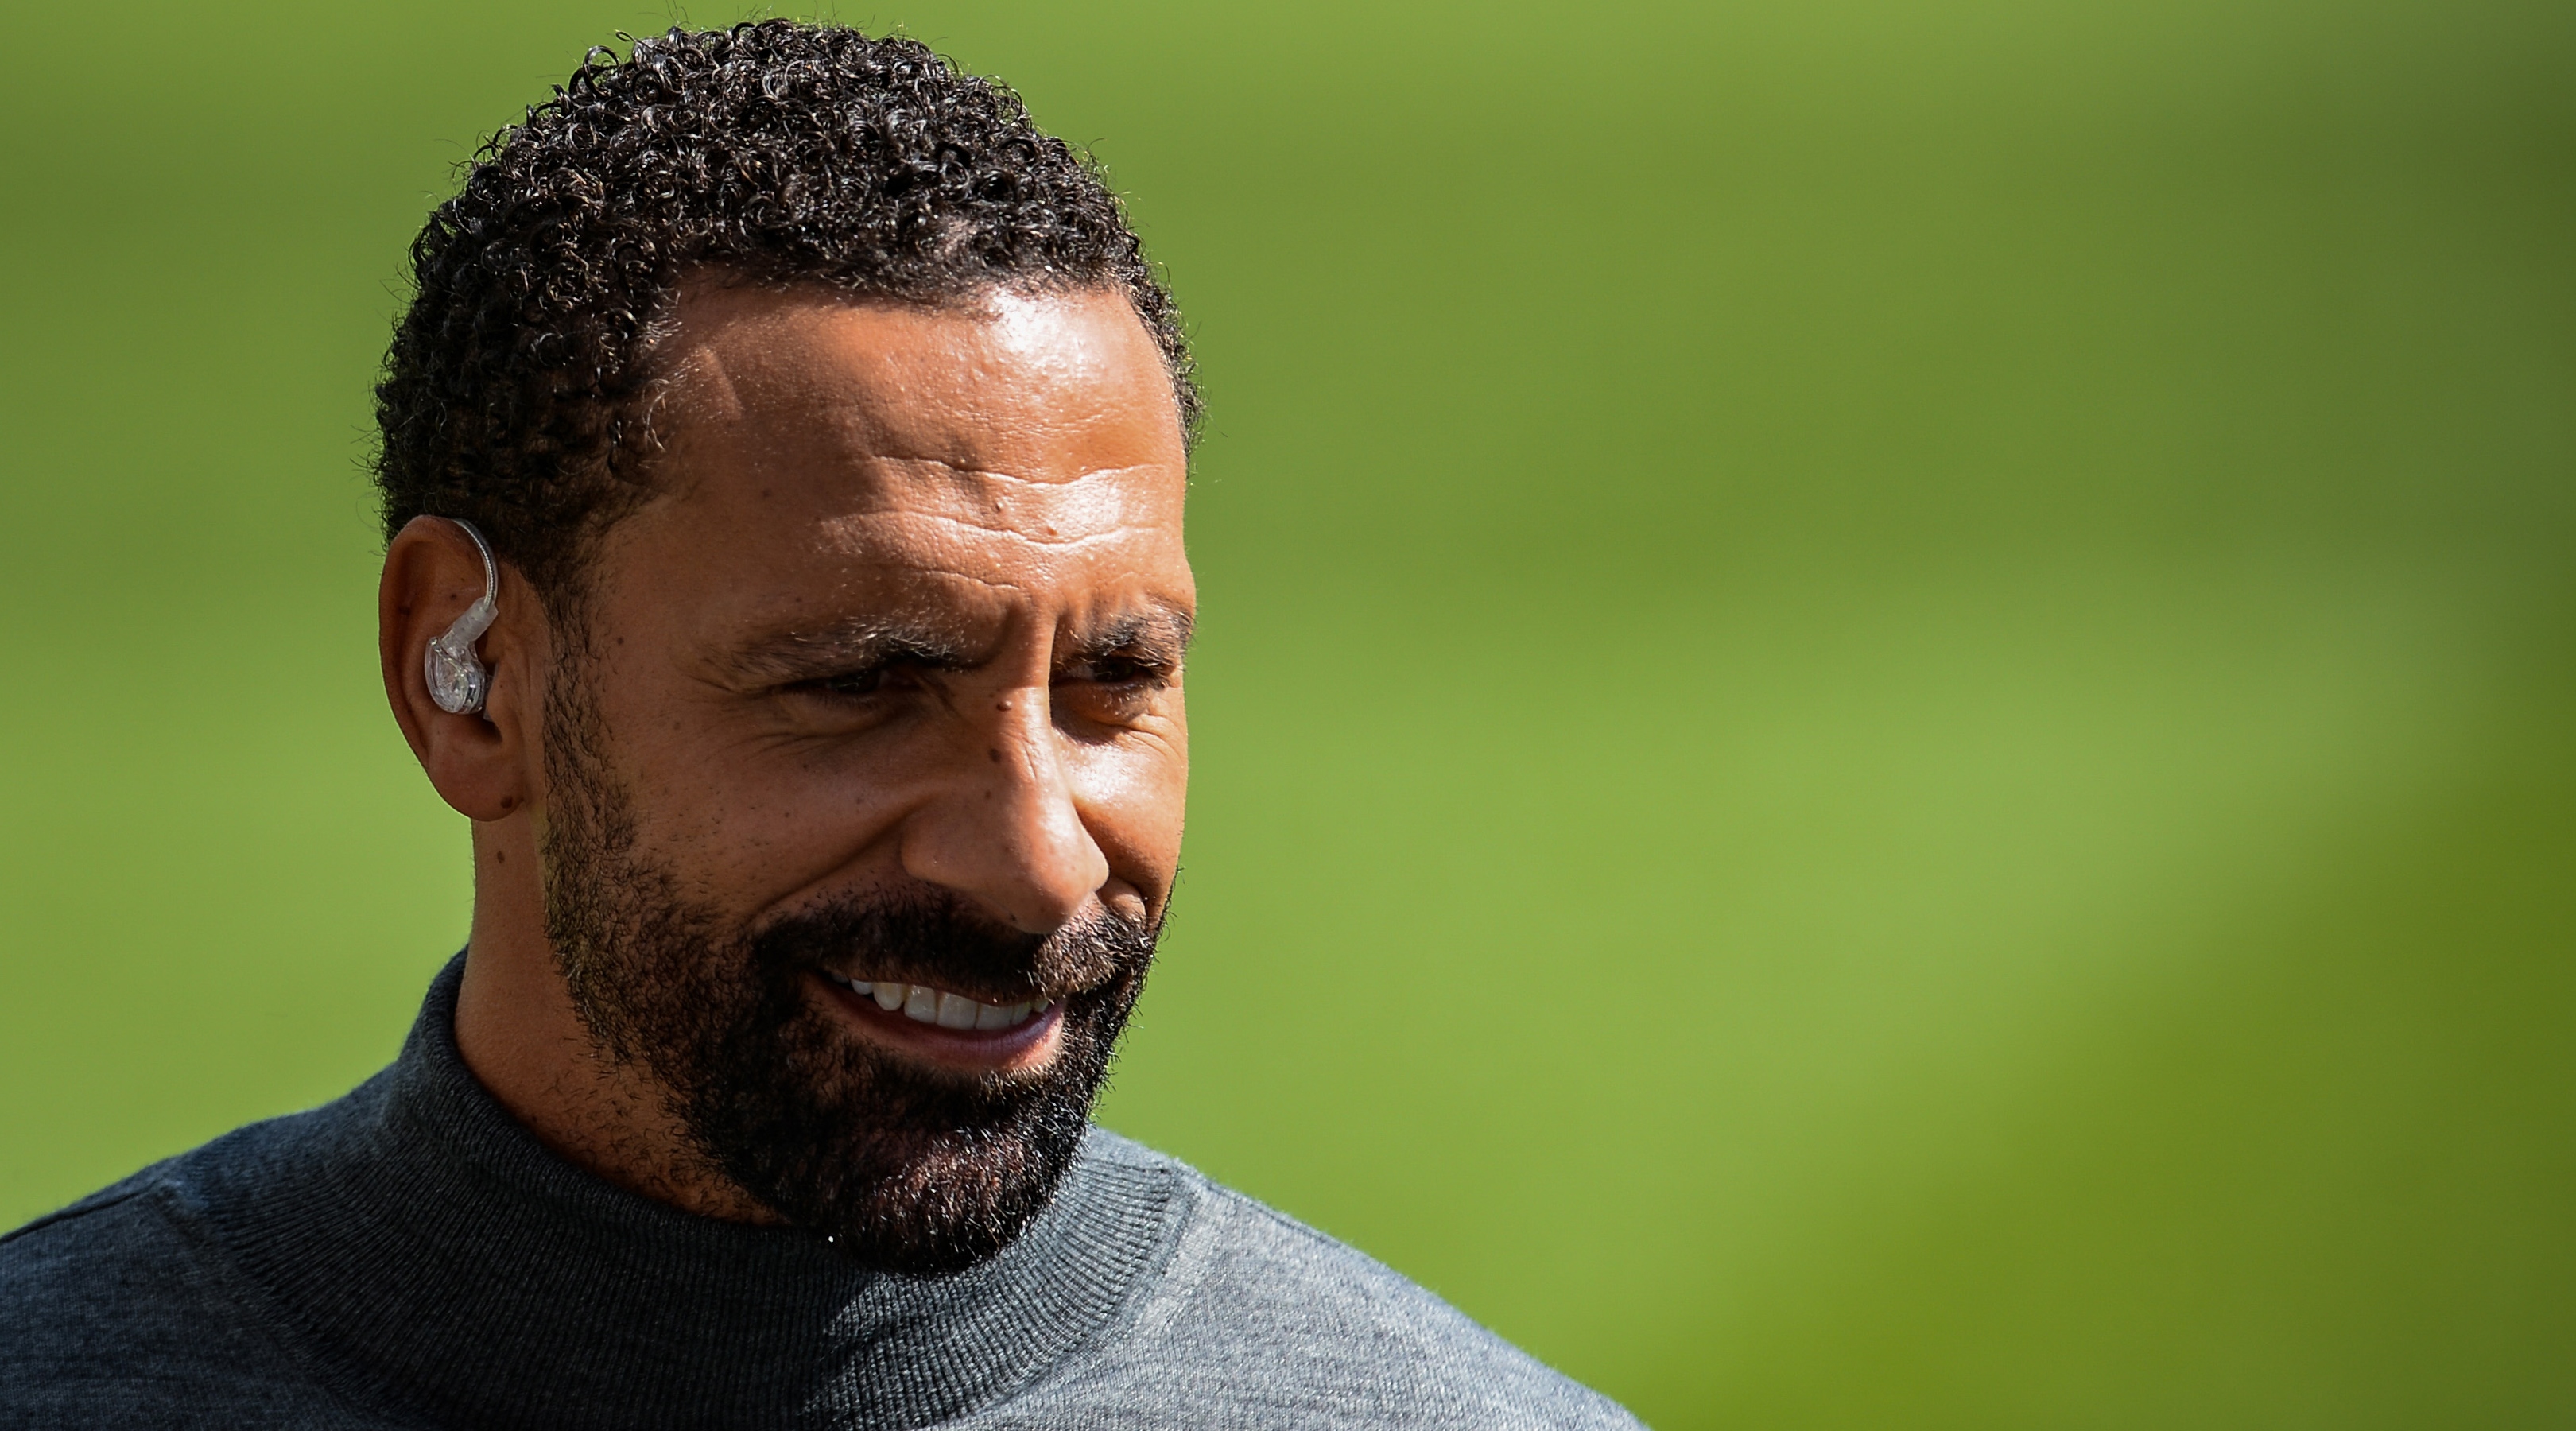 Ex Manchester player Rio Ferdinand during the Premier League match between Newcastle United and Liverpool at St. James Park on April 30, 2022 in Newcastle upon Tyne, England